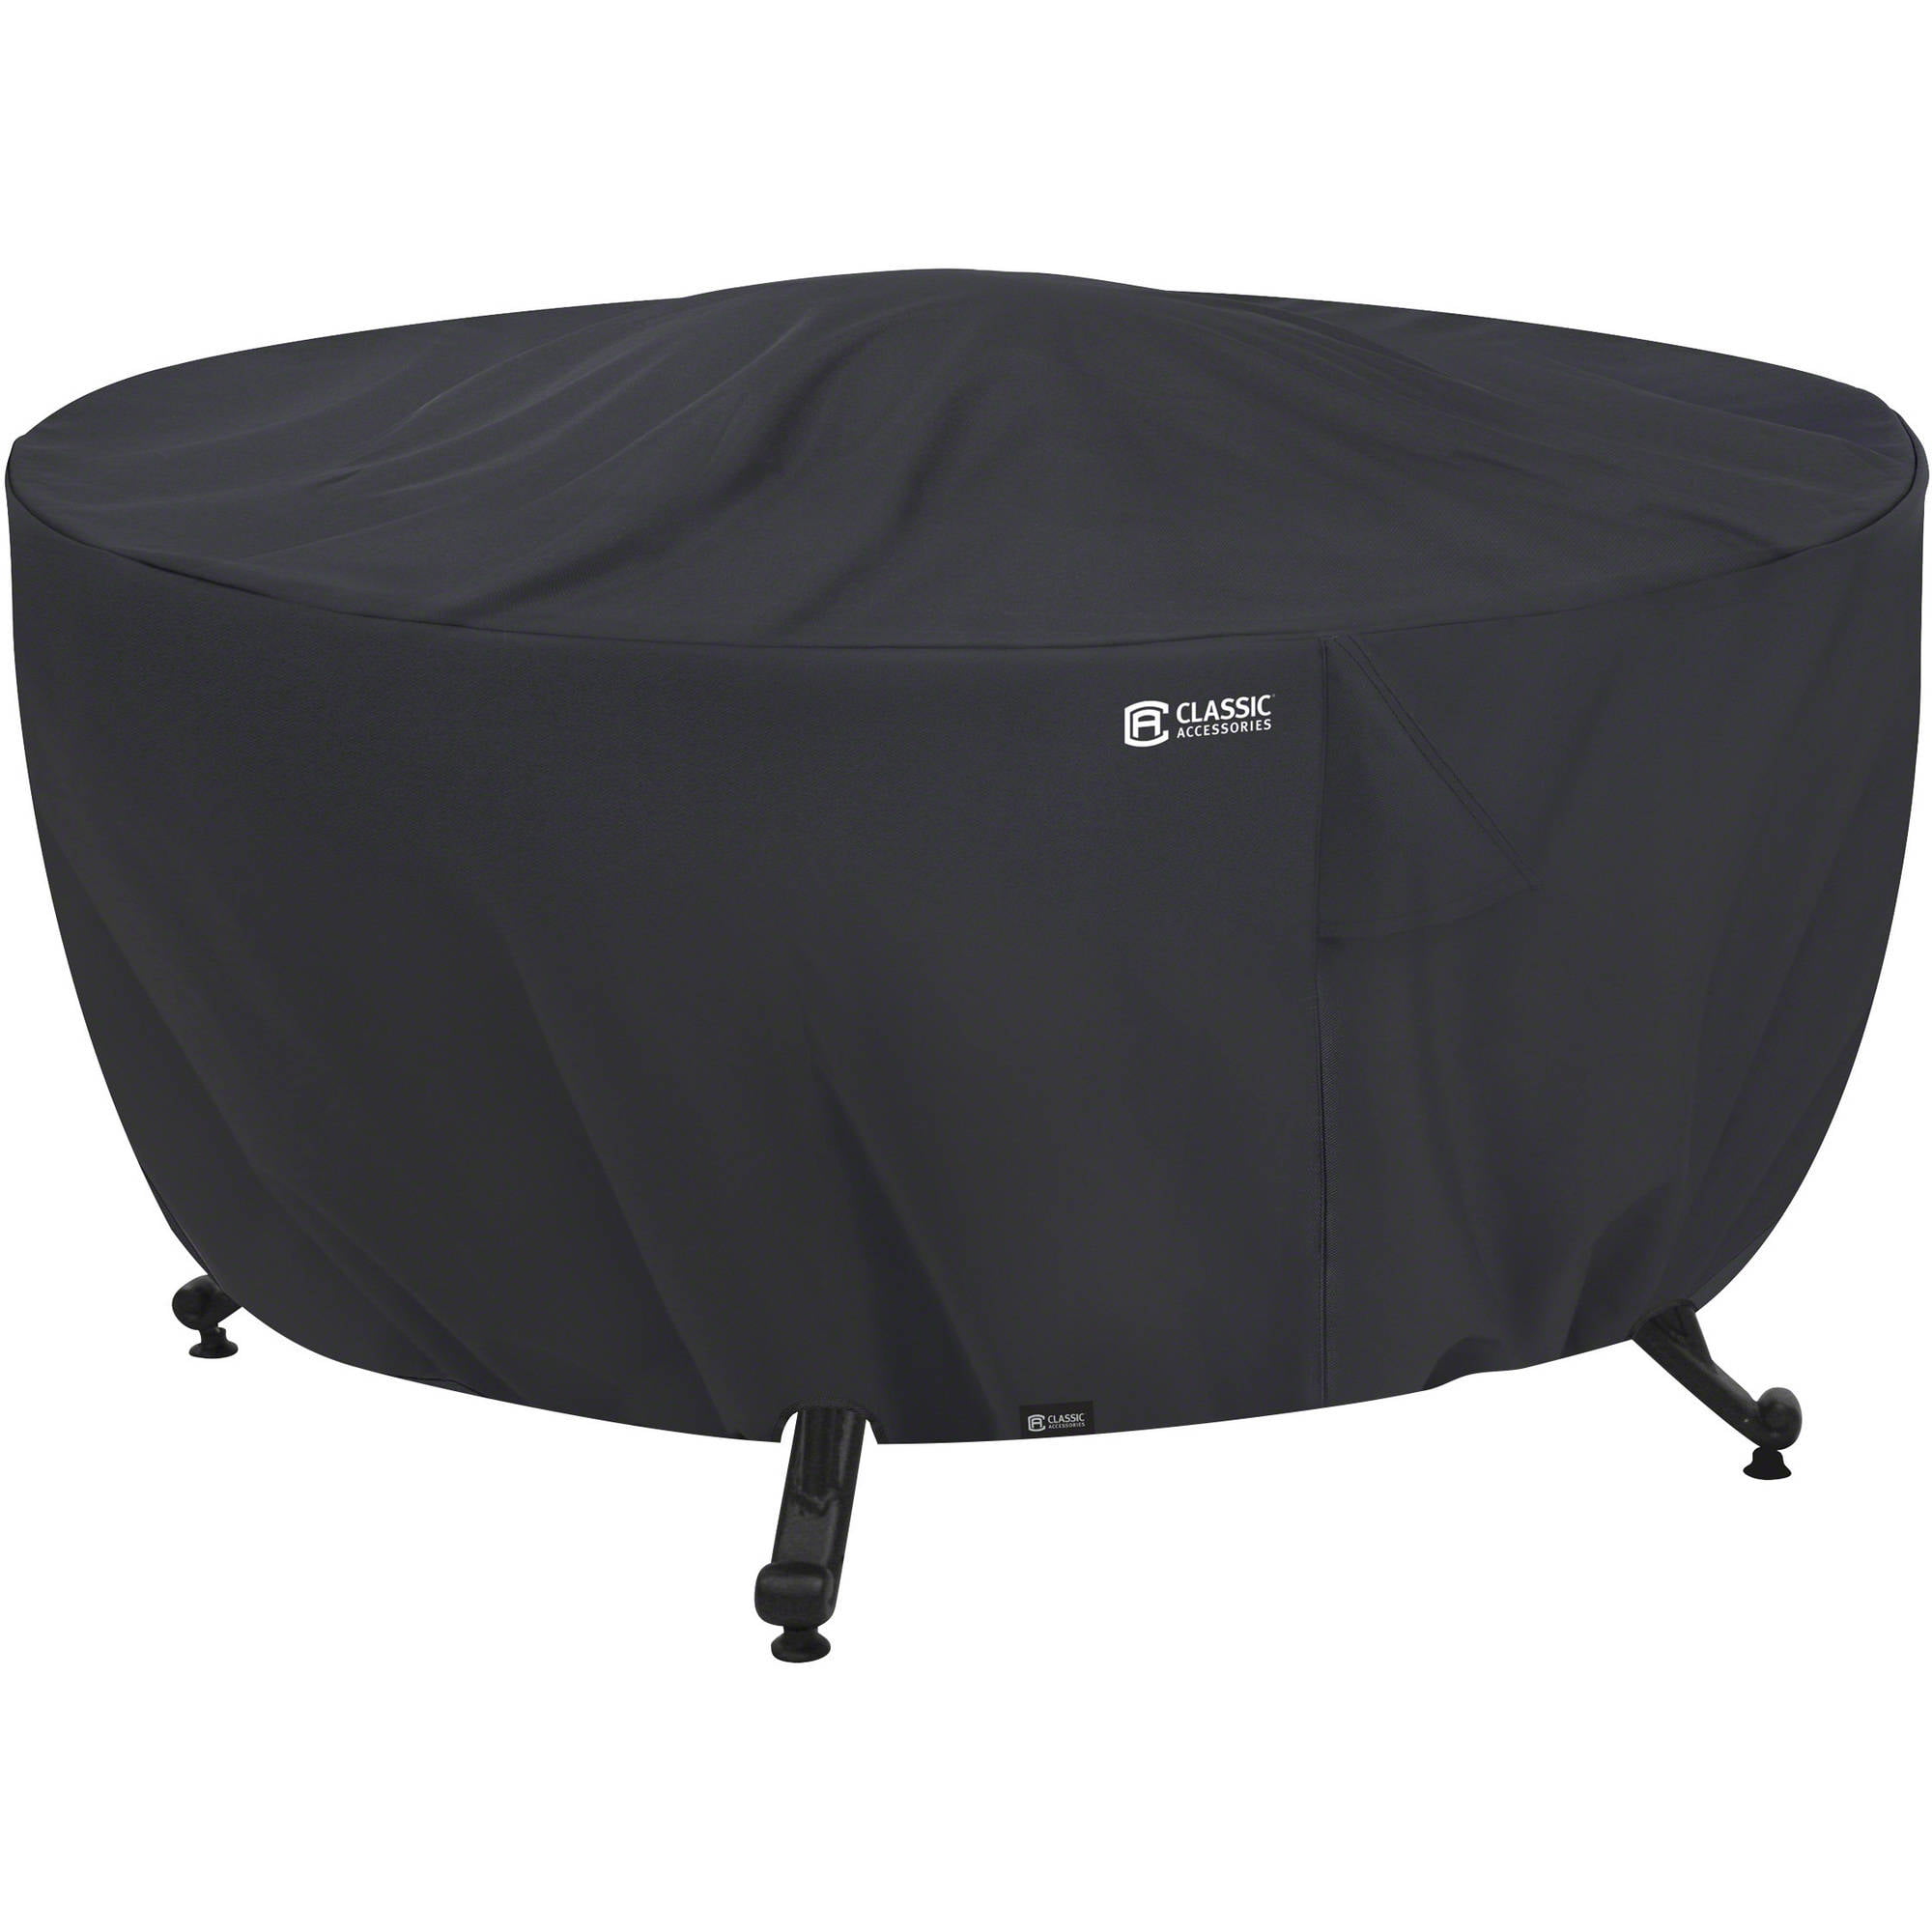 Classic Accessories Water Resistant 42, 42 Square Fire Pit Cover